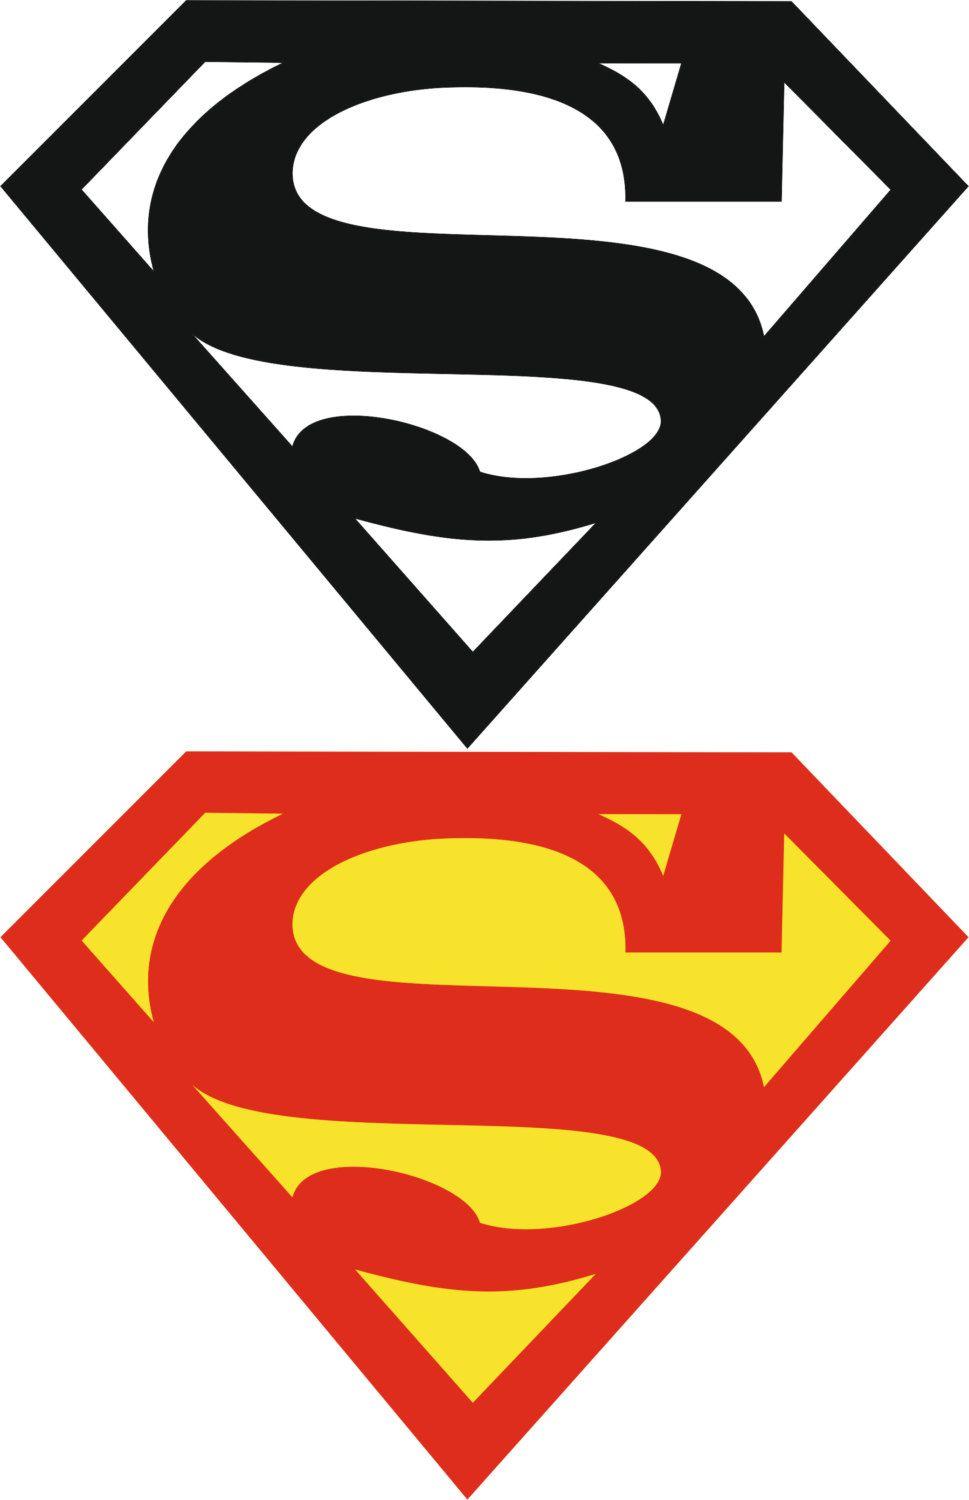 Red Black and White Superman Logo - Colord black white Superman superhero hero logo CNC Cut file Laser ...